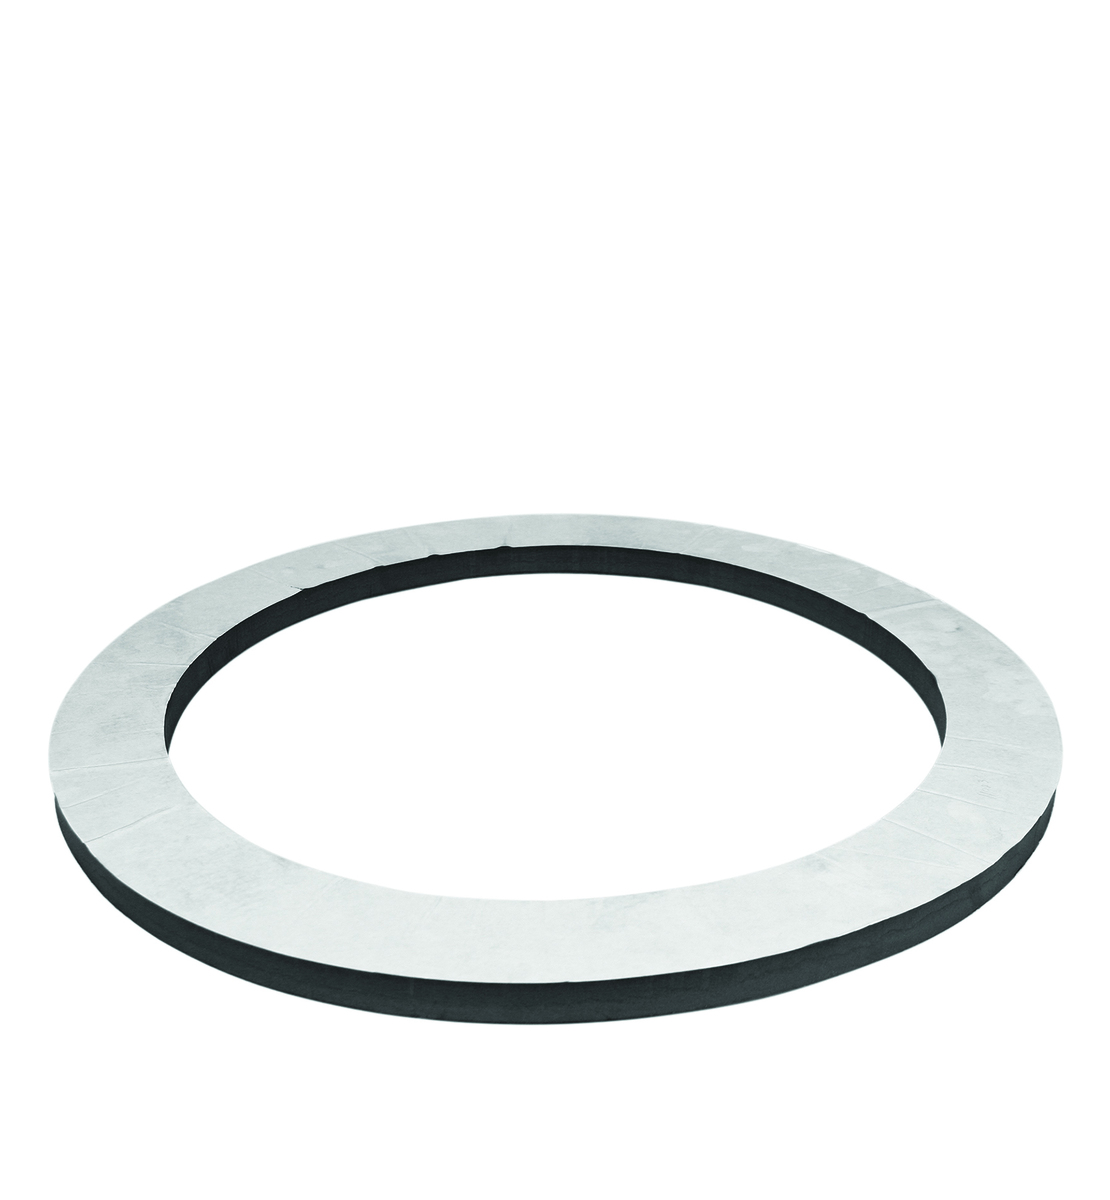 Justrite™ Replacement Gasket (For 26752 Or 26753 Drum Cover)